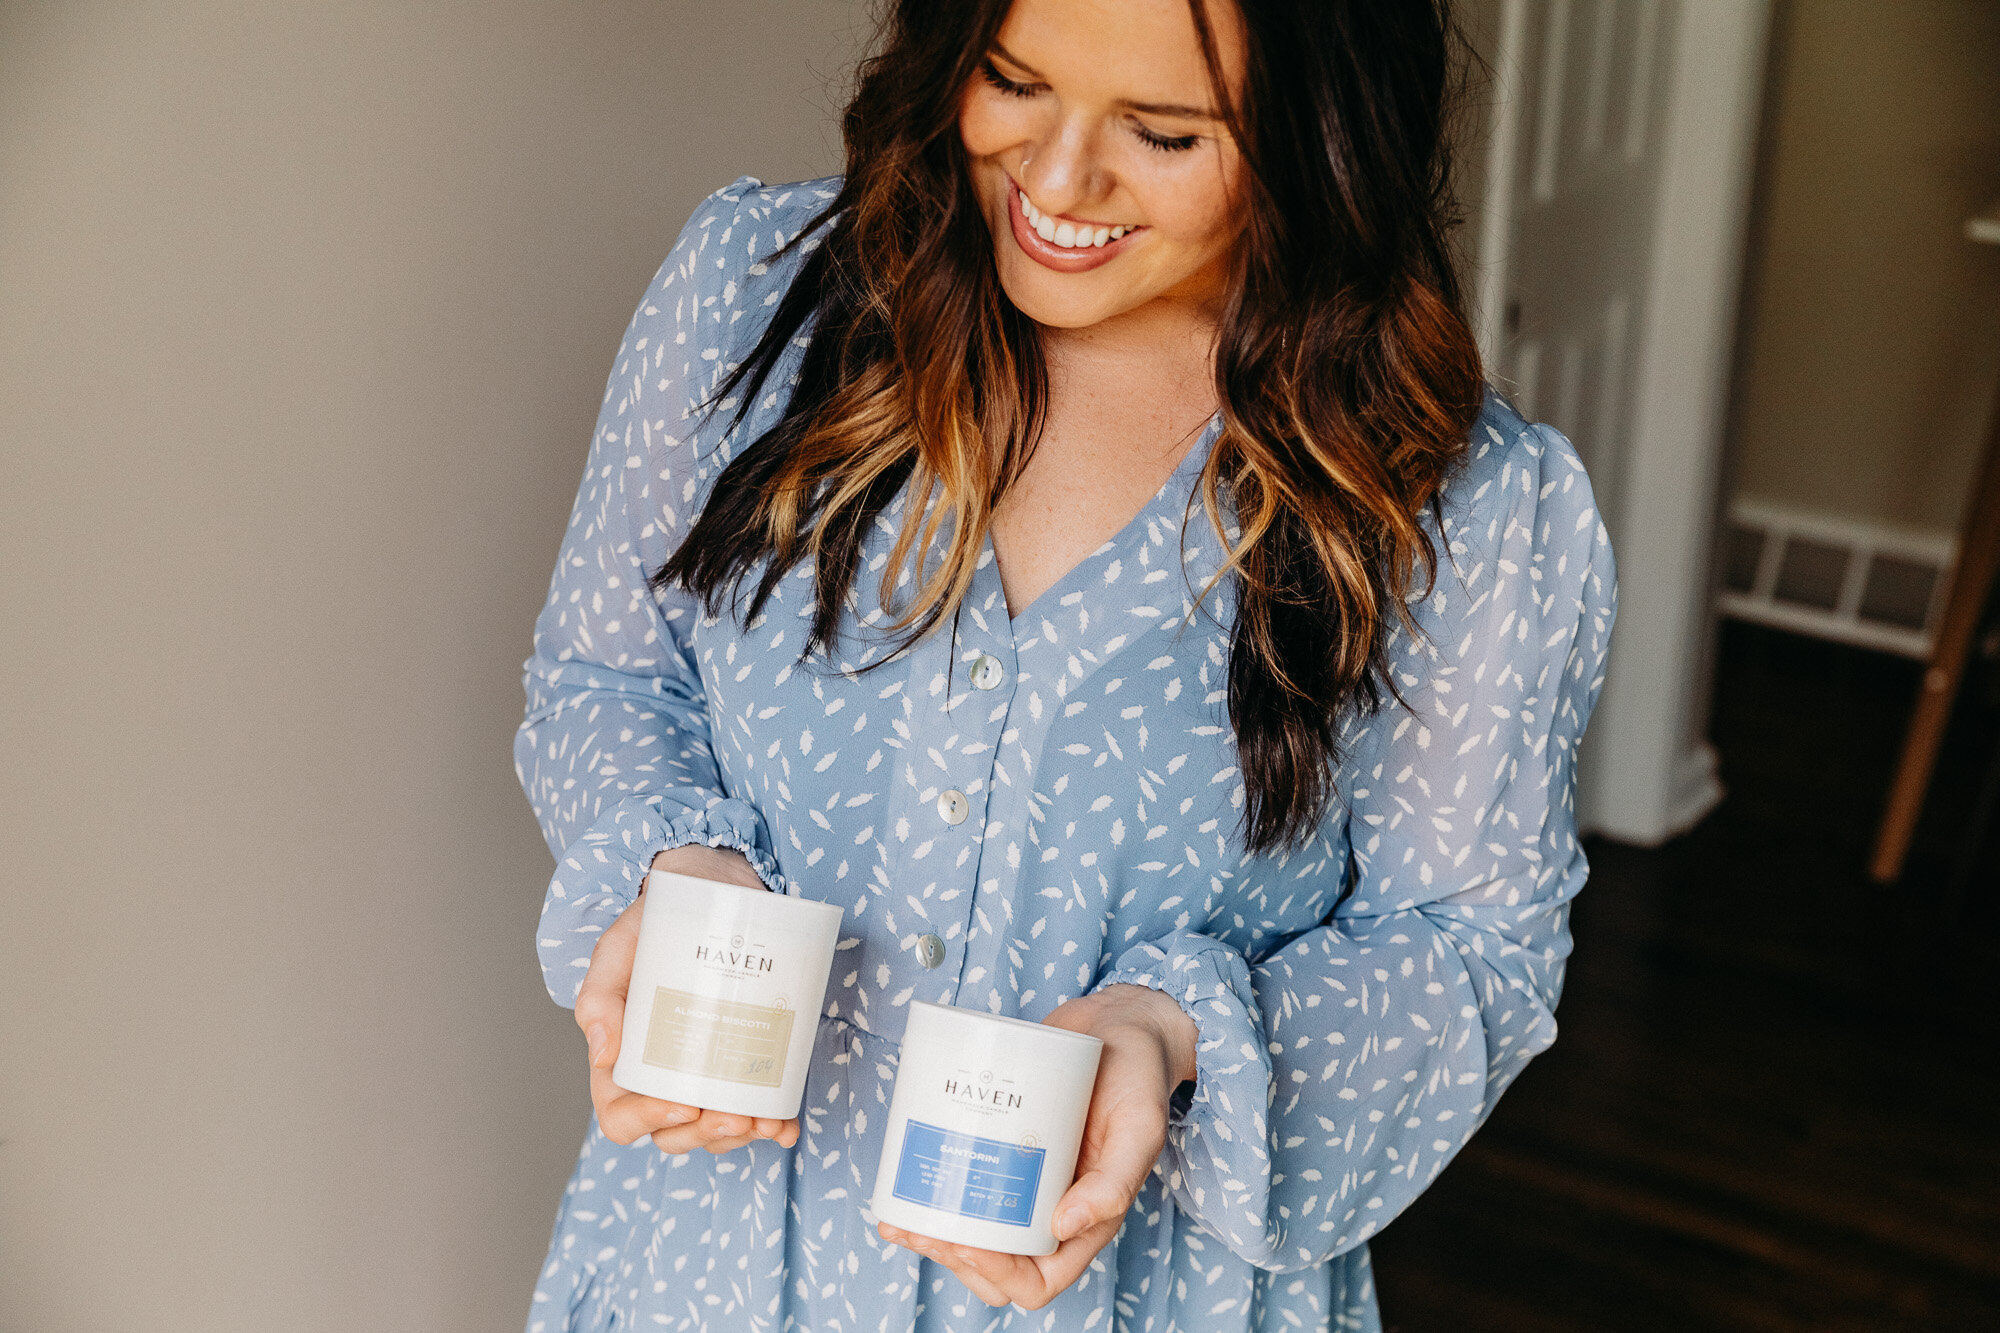 Small Business Spotlight: Haven Candle Co - A locally made, small batch, natural candle company in Nebraska. The best scented candles I've ever smelled. These candles make perfect gifts. | Nadine Stay